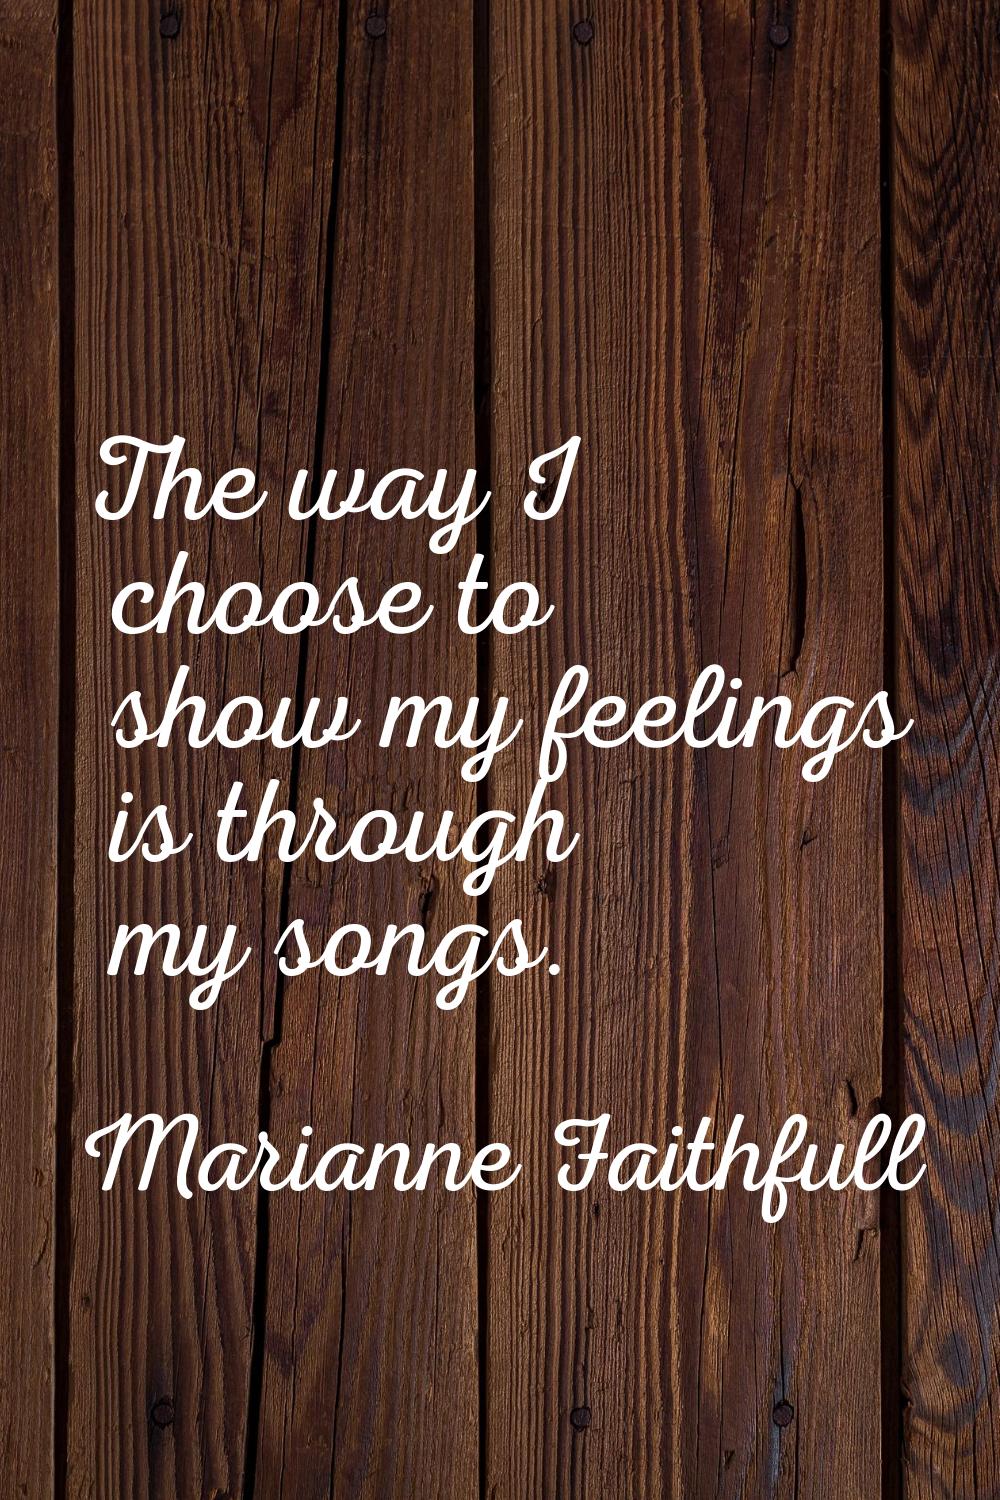 The way I choose to show my feelings is through my songs.